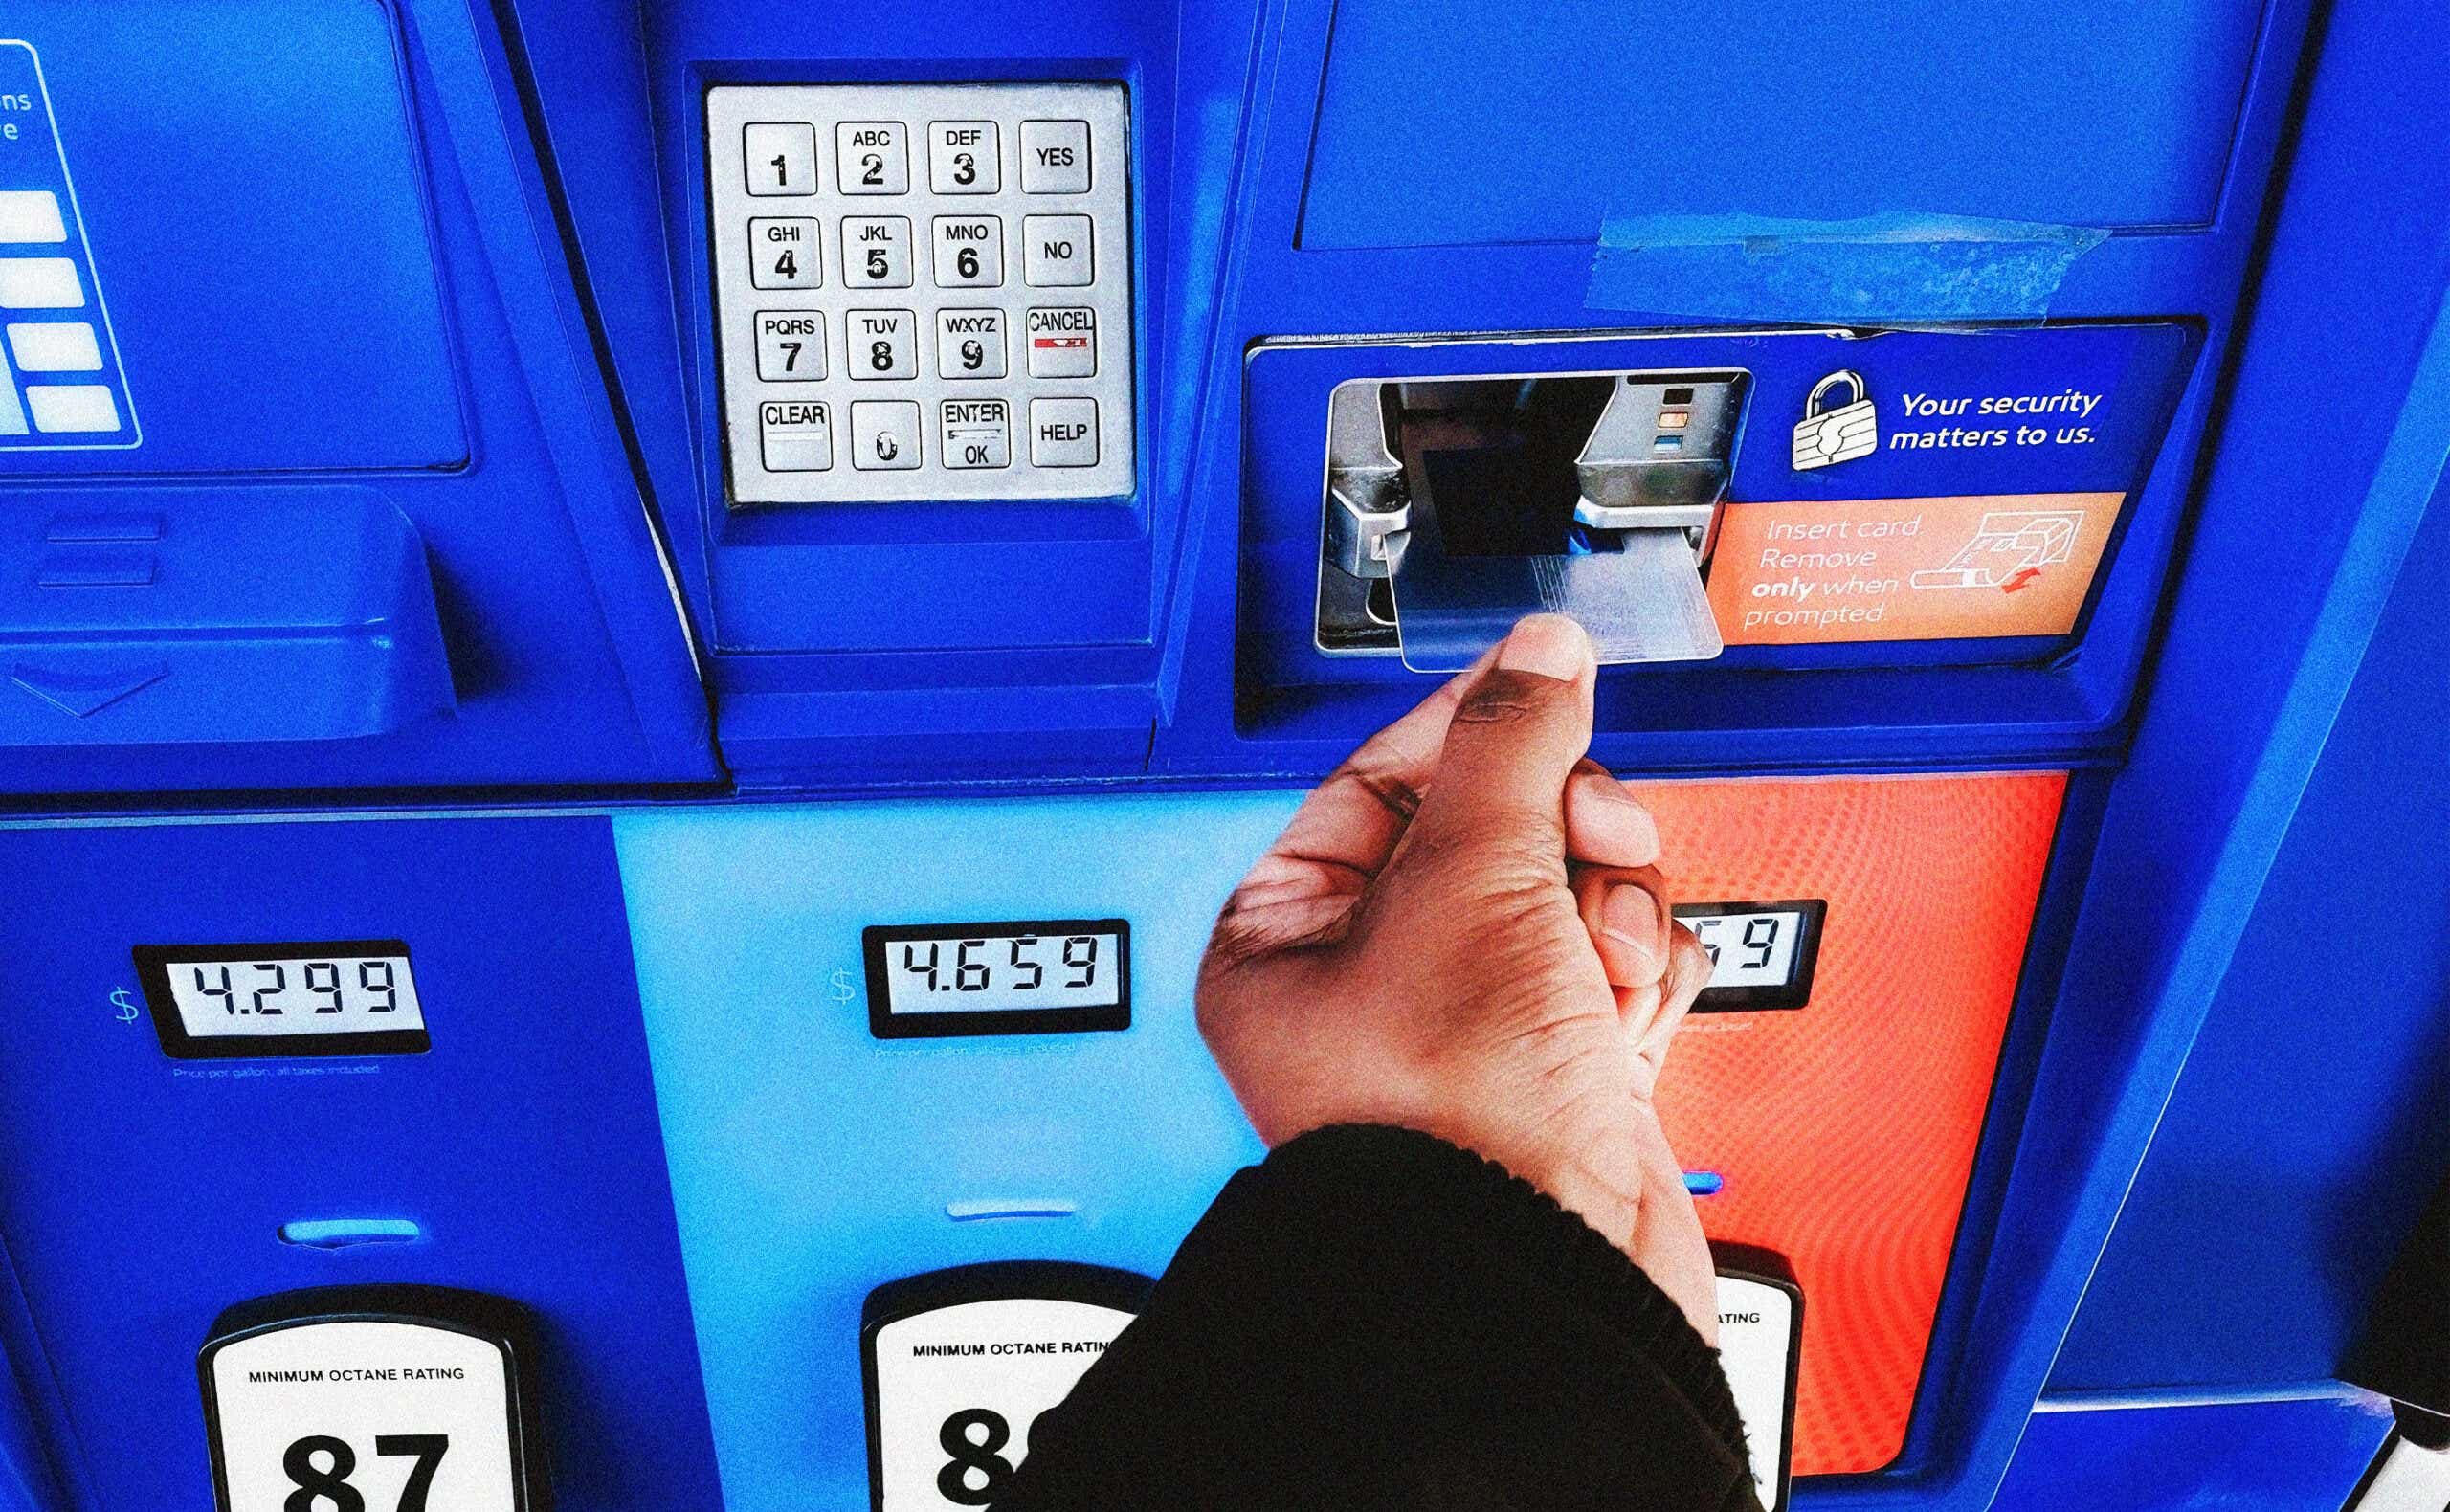 Black person using credit card to purchase gas priced at over $4 per gallon